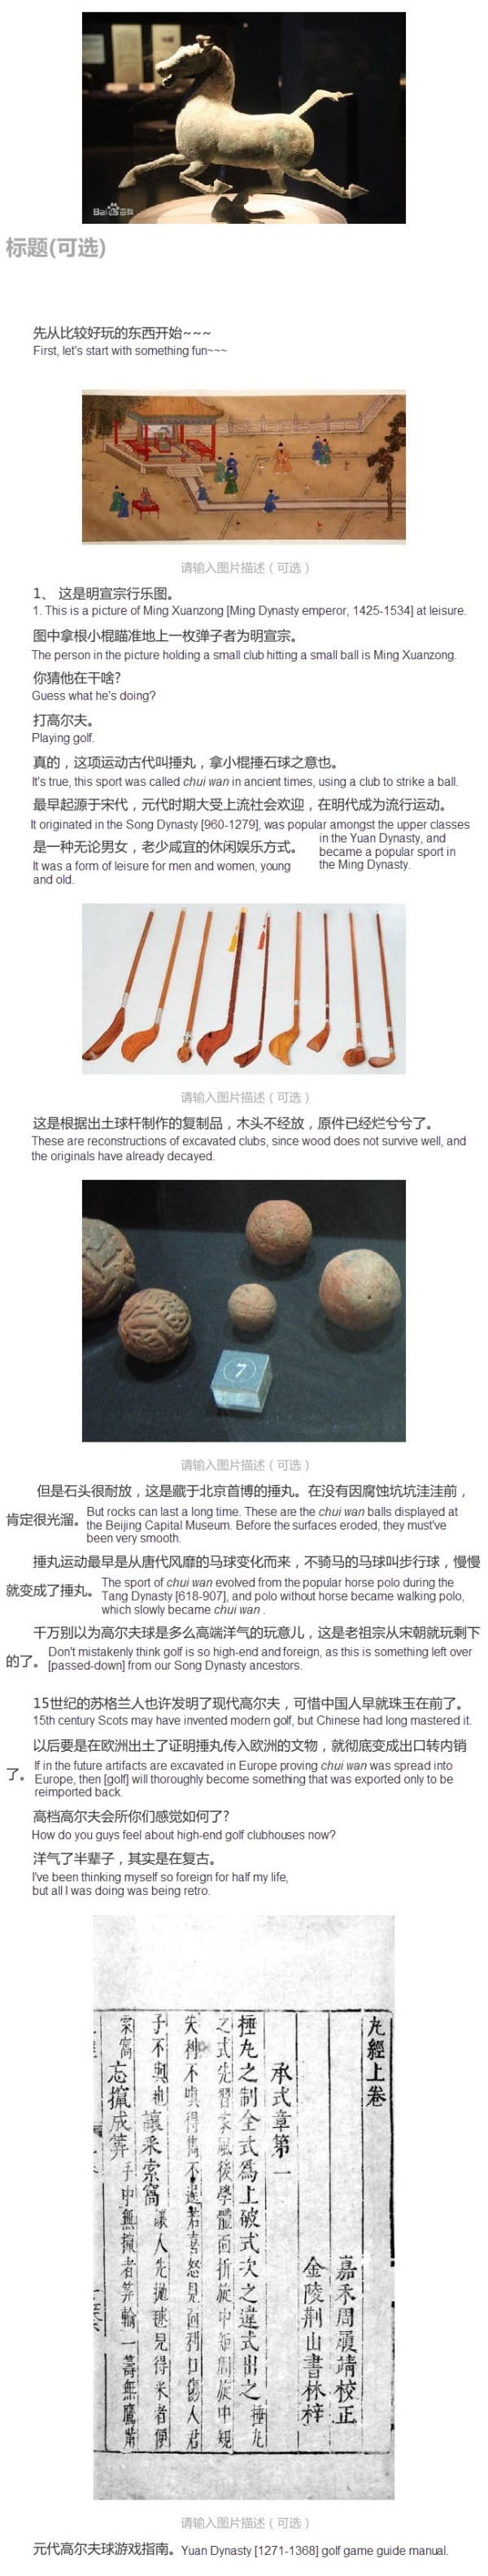 15-ancient-chinese-inventions-that-were-ahead-of-their-time-part-1.jpg